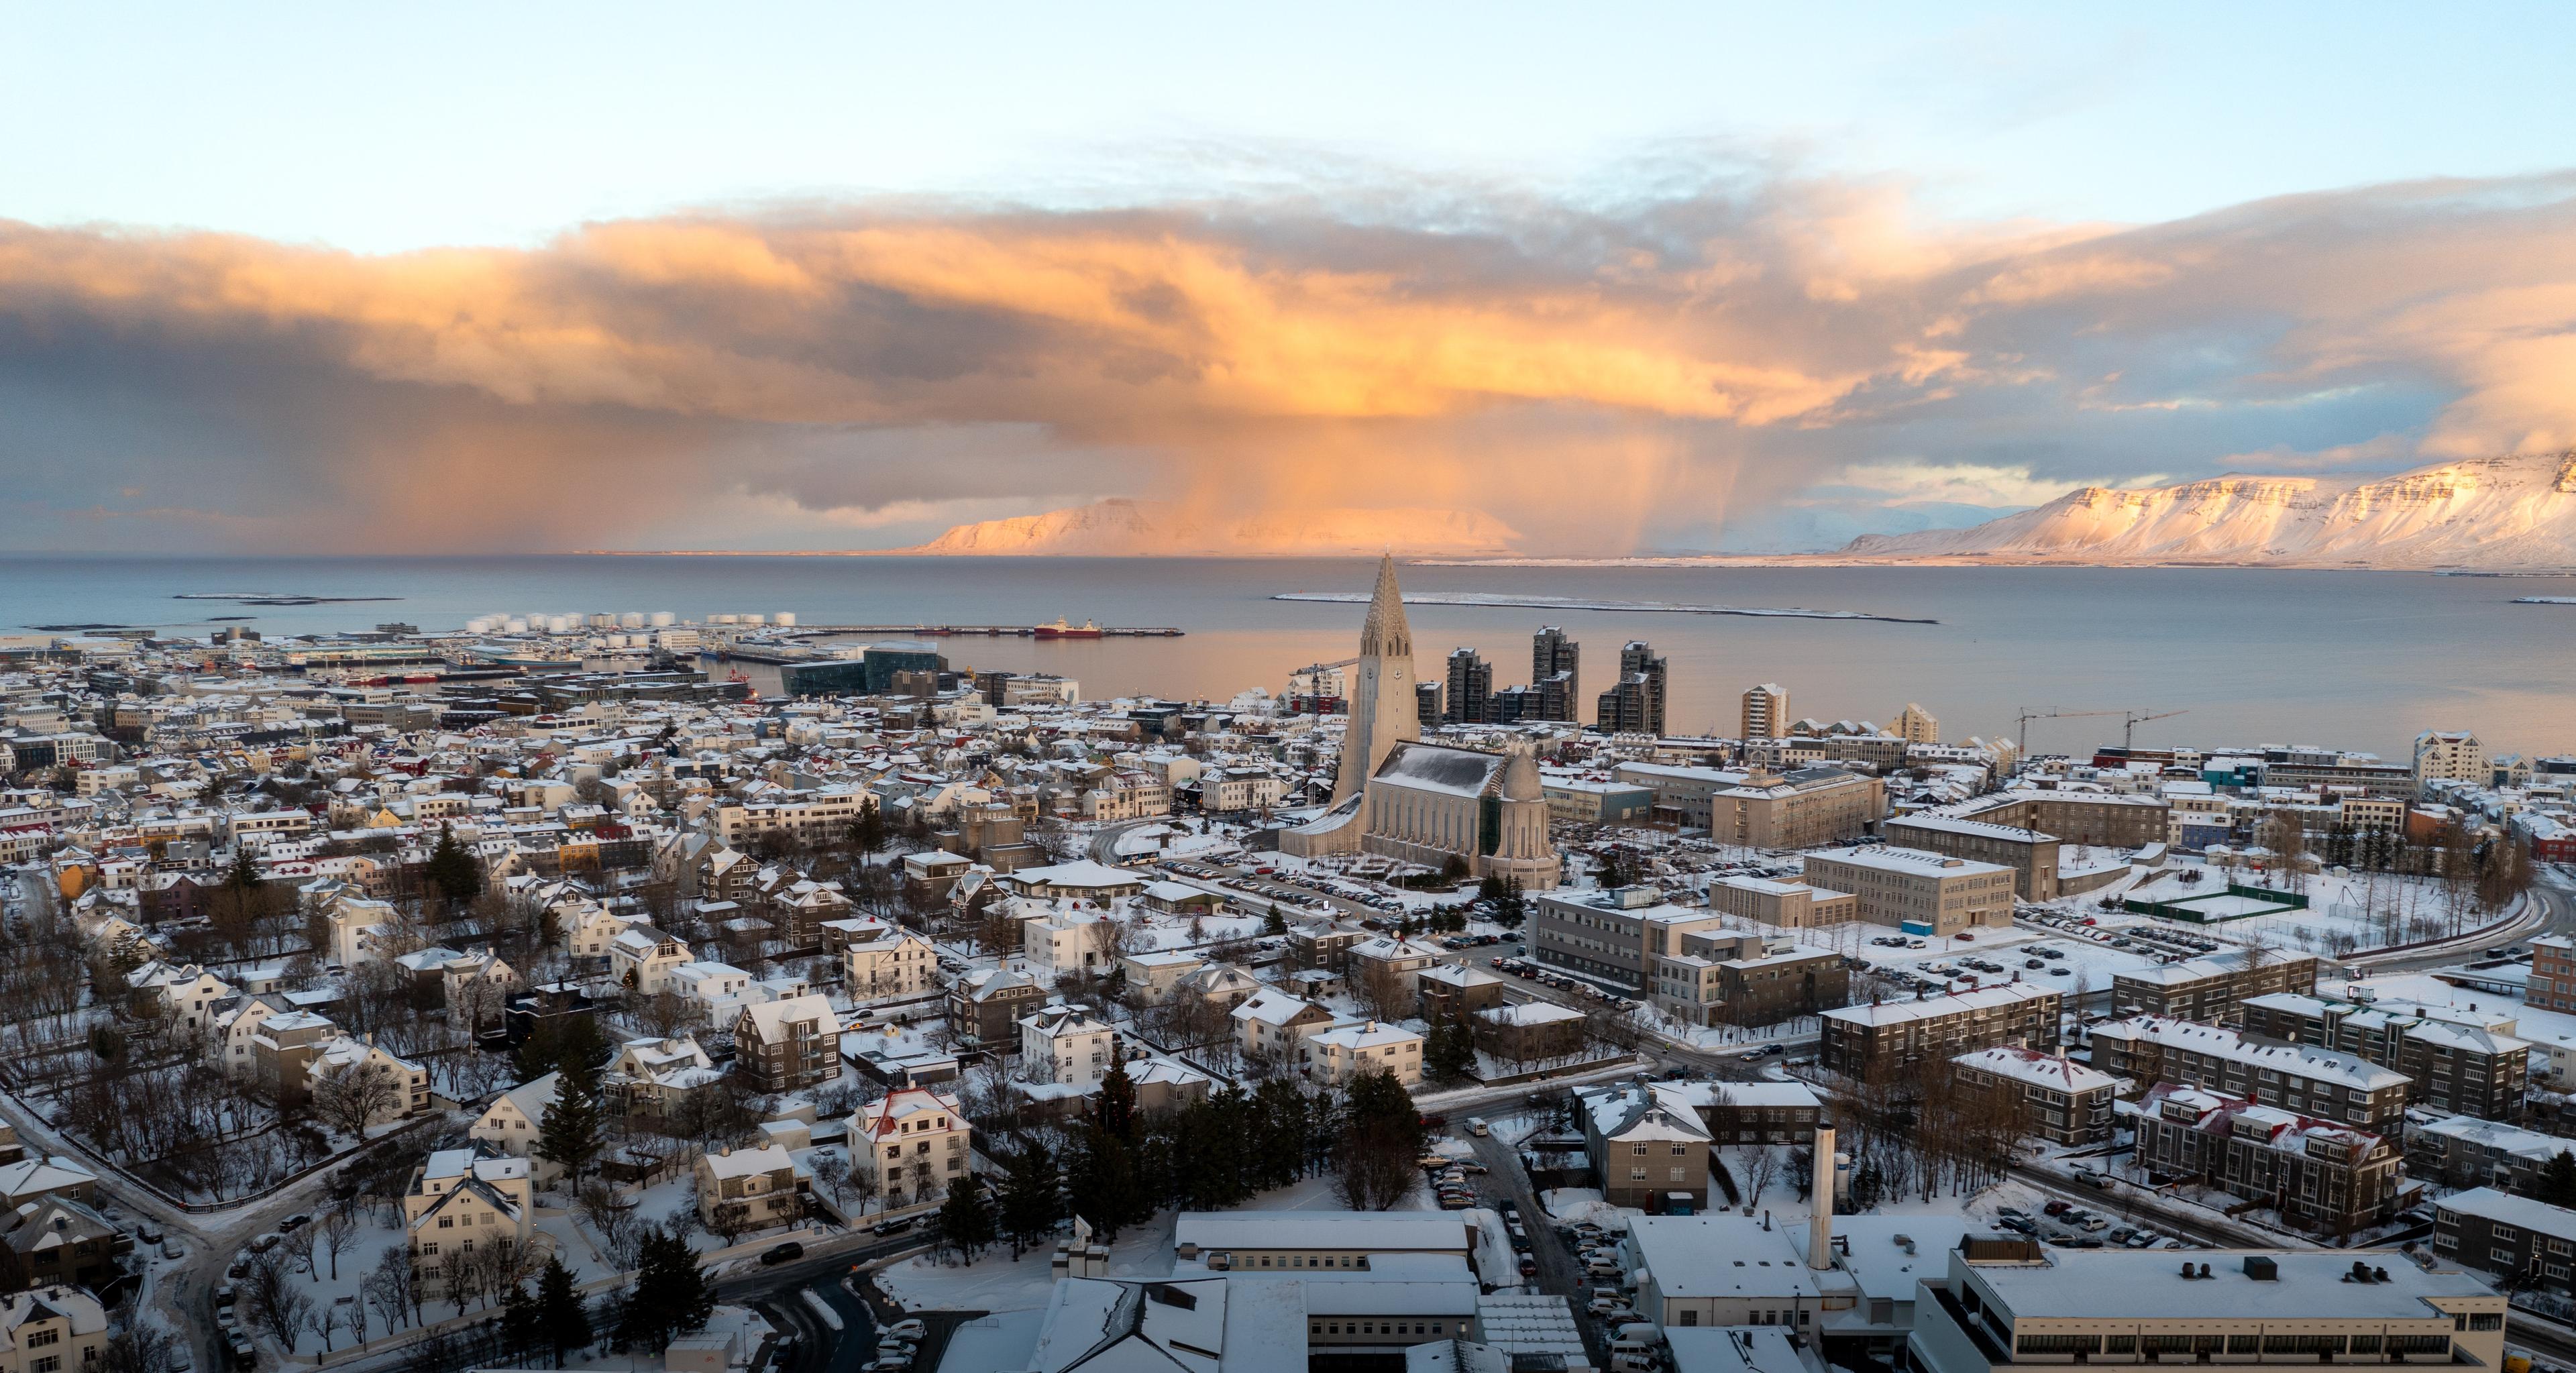  A panoramic view of Reykjavik blanketed in snow at sunrise or sunset, with the iconic Hallgrímskirkja church standing tall amidst the cityscape